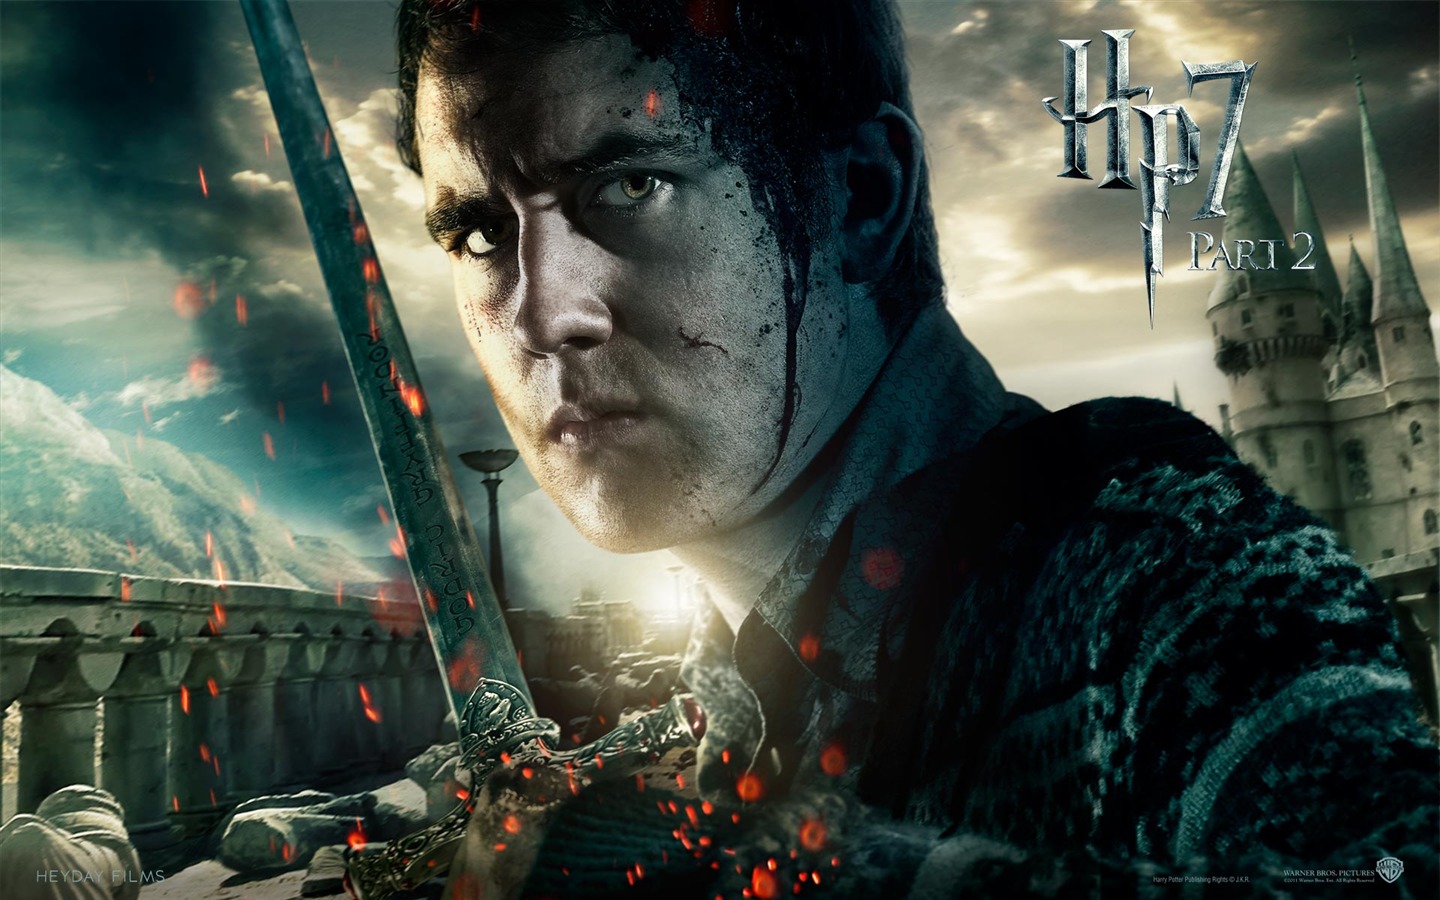 2011 Harry Potter and the Deathly Hallows HD wallpapers #13 - 1440x900